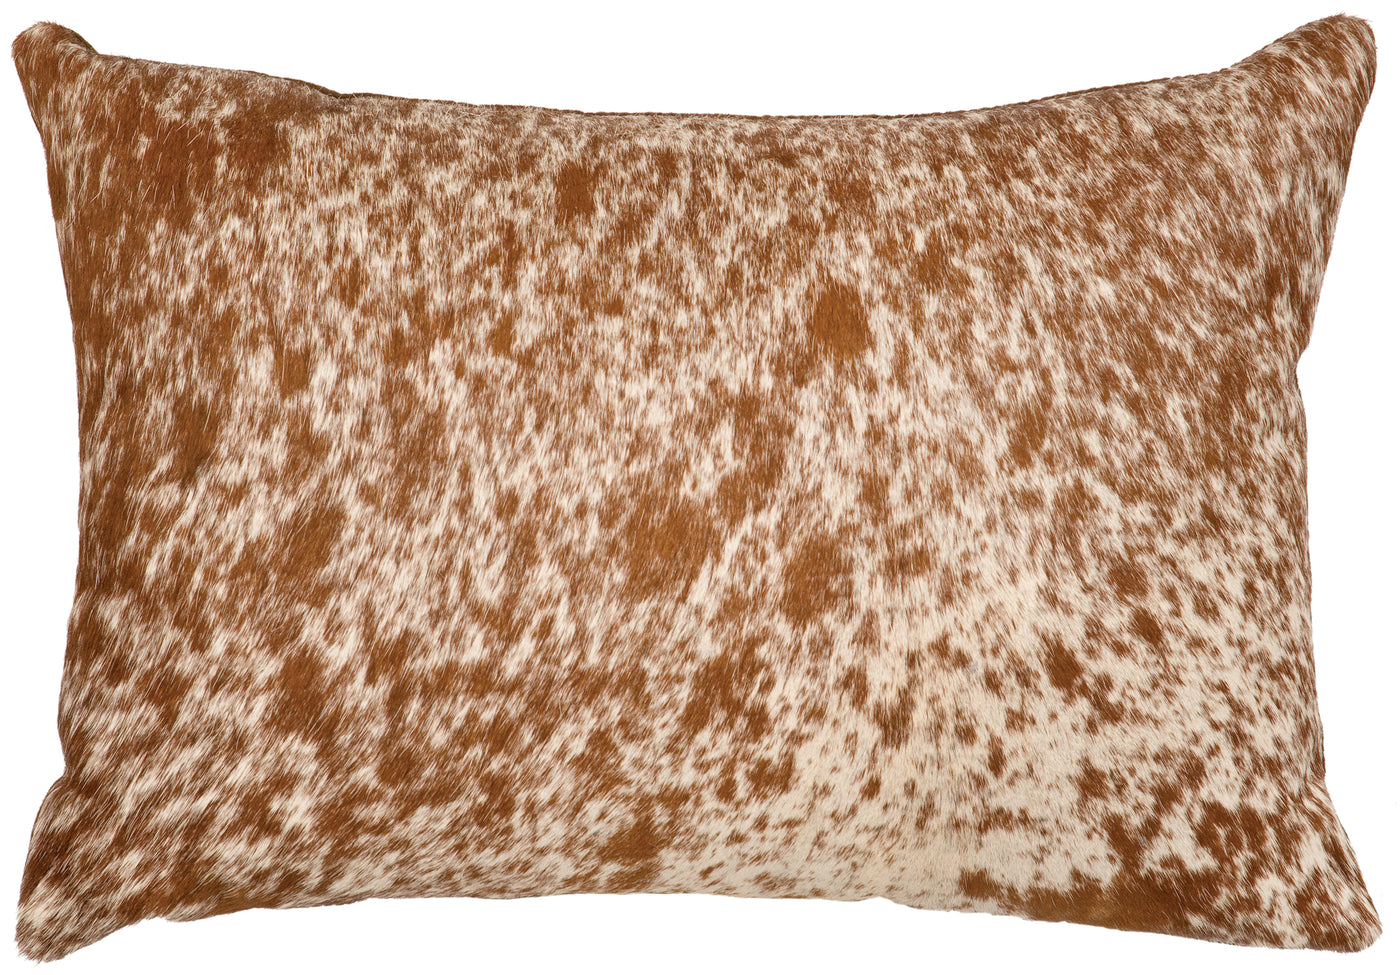 Canvello Speckled Light Brown Leather Pillow - Leather Back - 16" x 16"